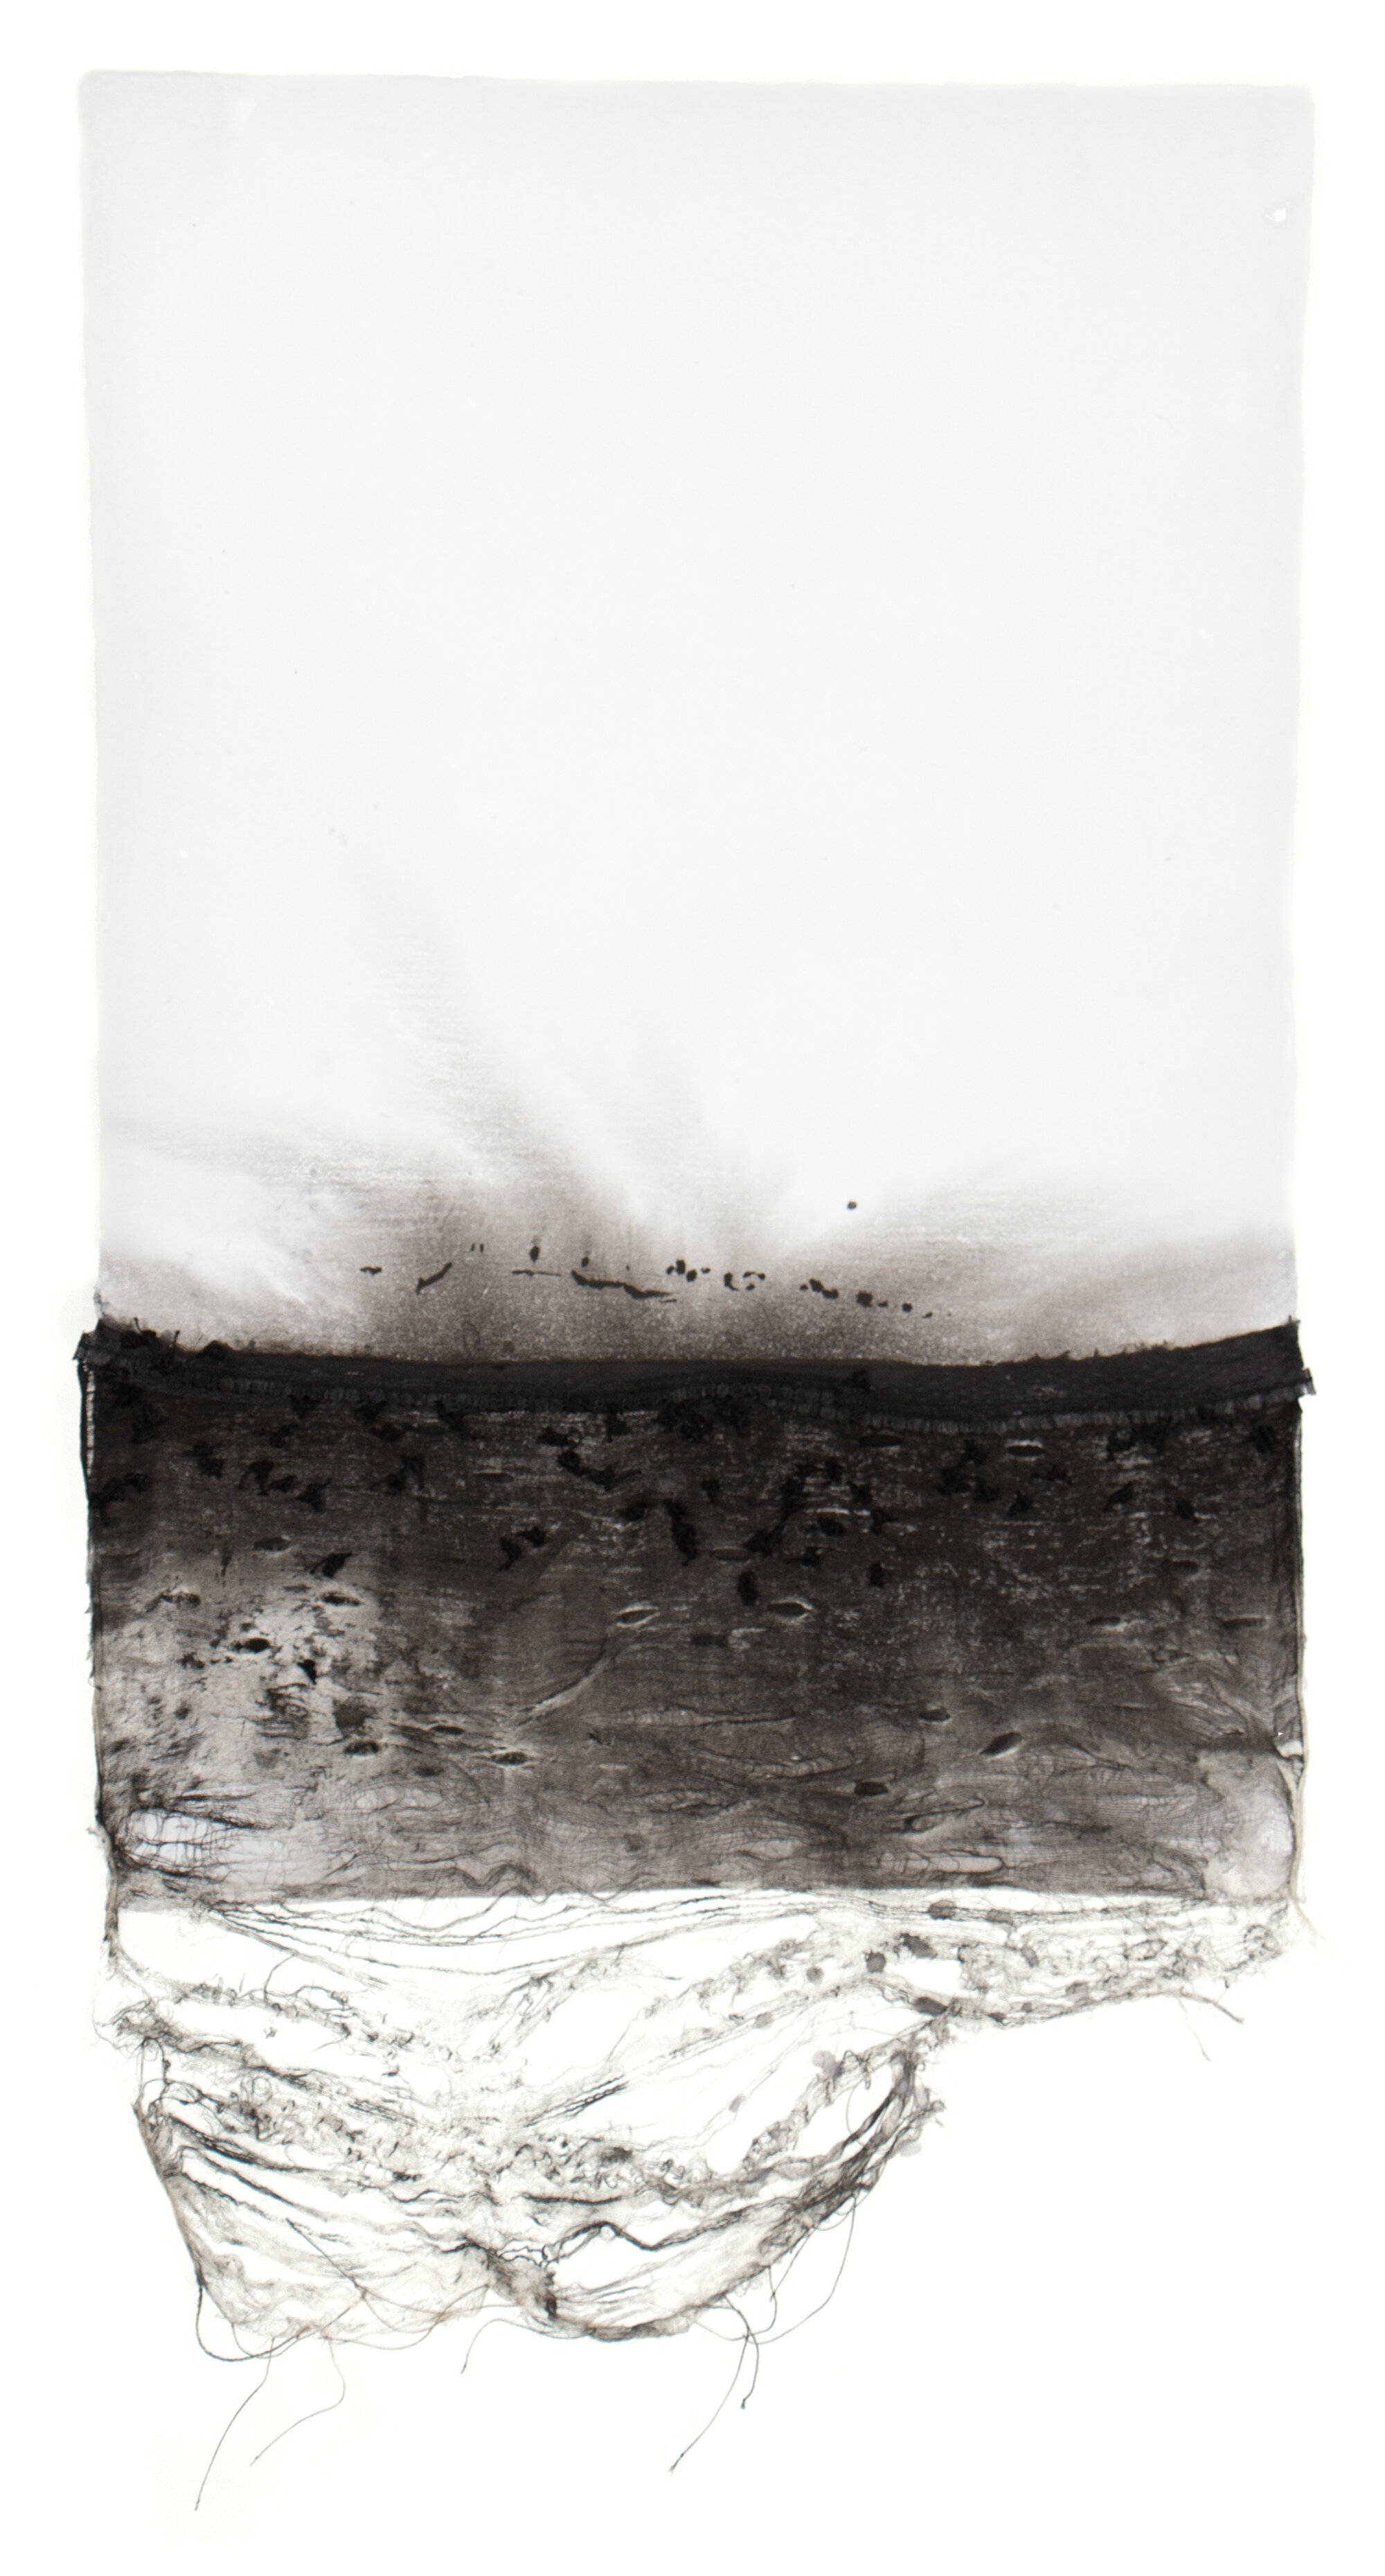   Untitled , 2019 Handmade linen paper, fabric, lace, thread, pigment, and paper pulp 40 x 20 in. 